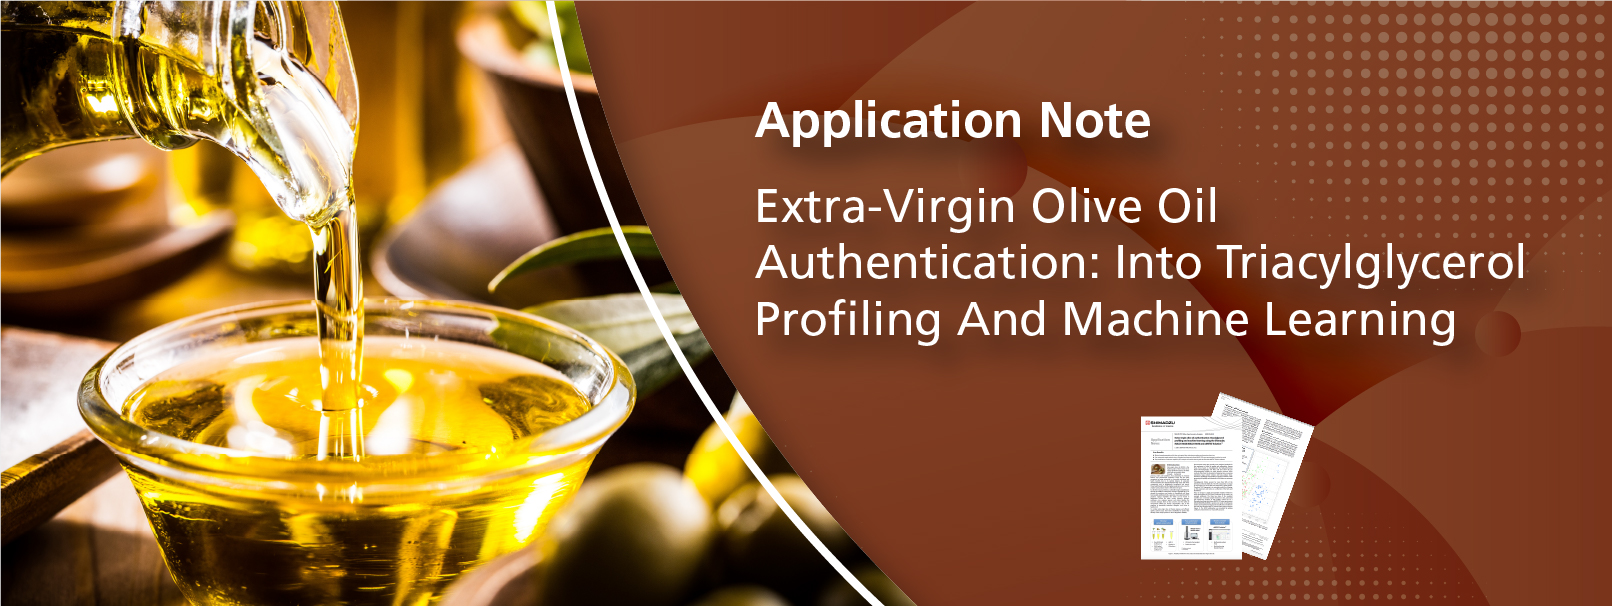 Extra-Virgin Olive Oil Authentication: Into Triacylglycerol Profiling and Machine Learning